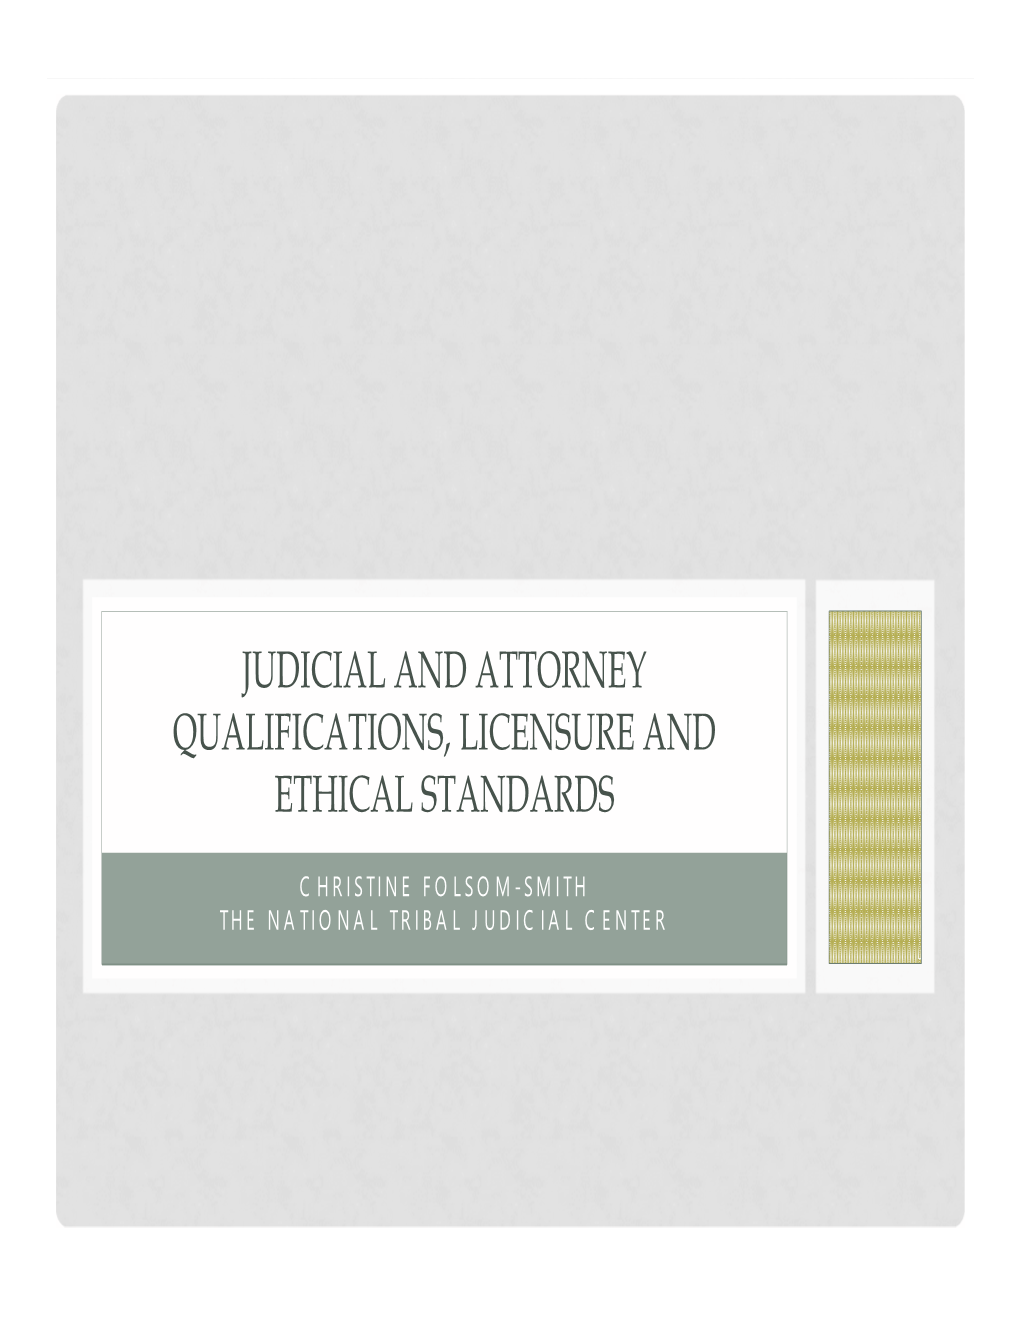 Judicial and Attorney Qualifications, Licensure and Ethical Standards